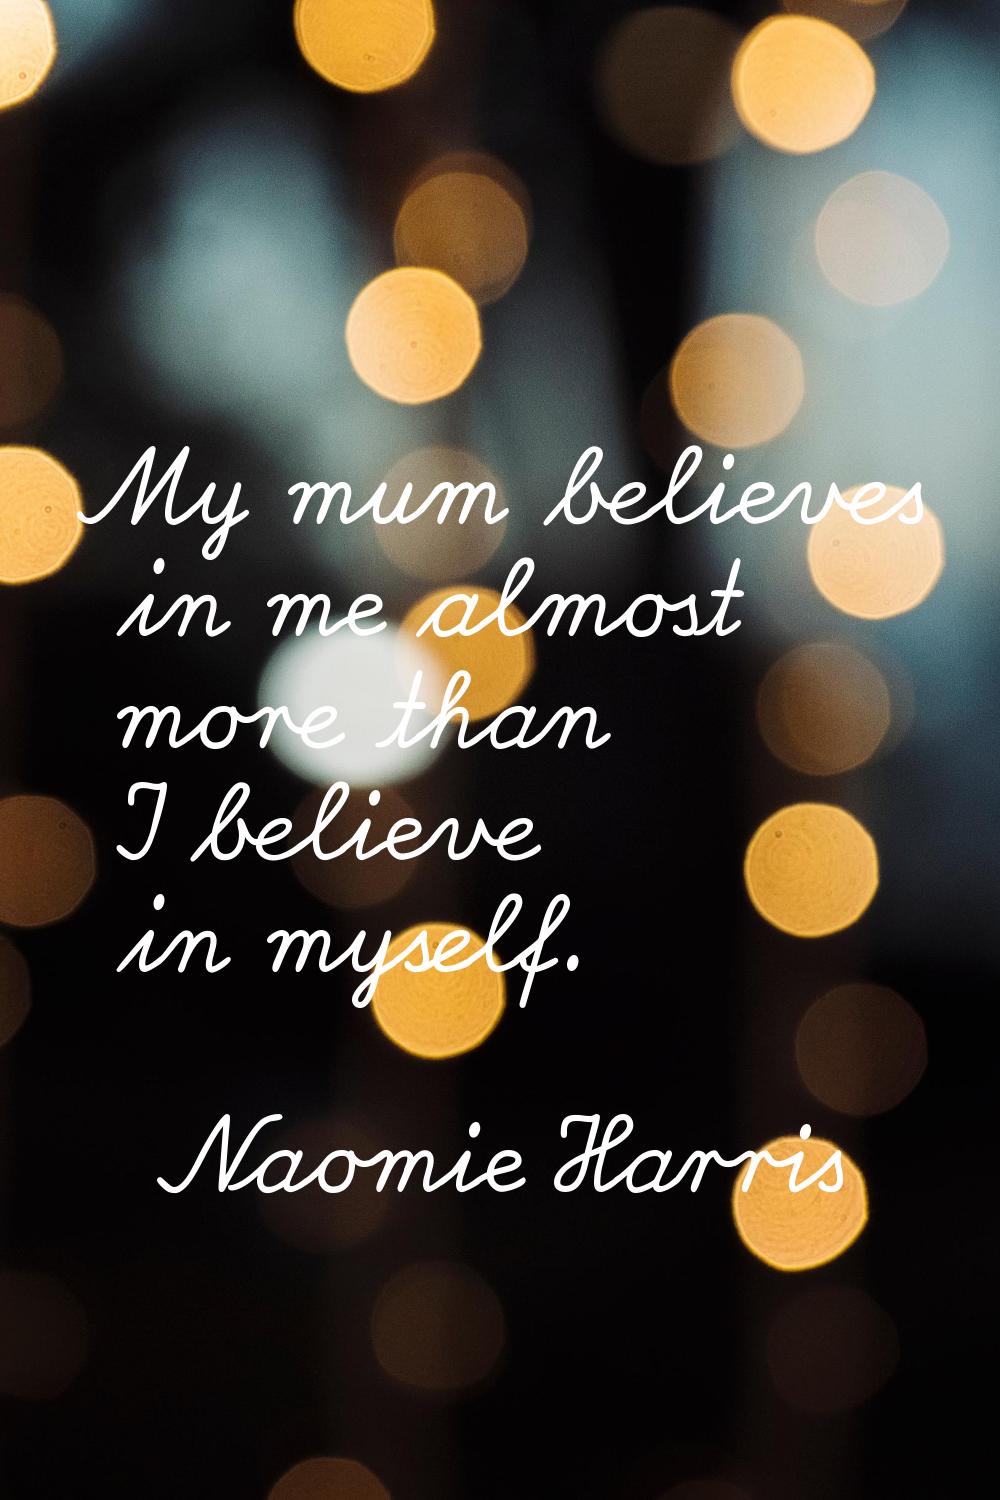 My mum believes in me almost more than I believe in myself.